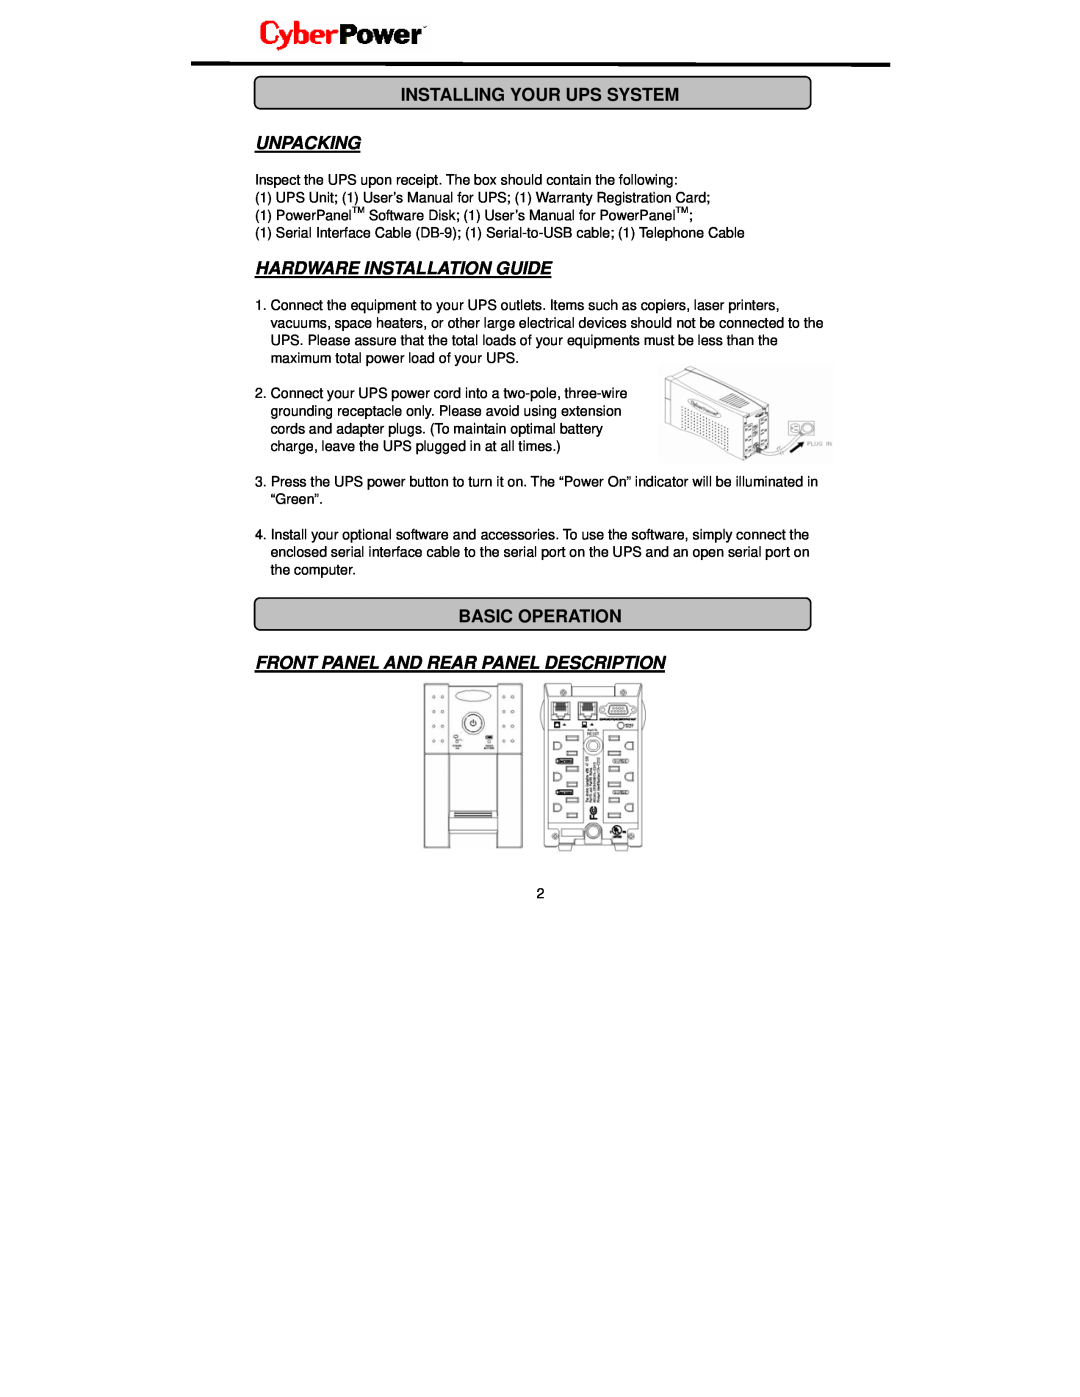 CyberPower Systems UP425 user manual Installing Your Ups System, Basic Operation, Unpacking, Hardware Installation Guide 